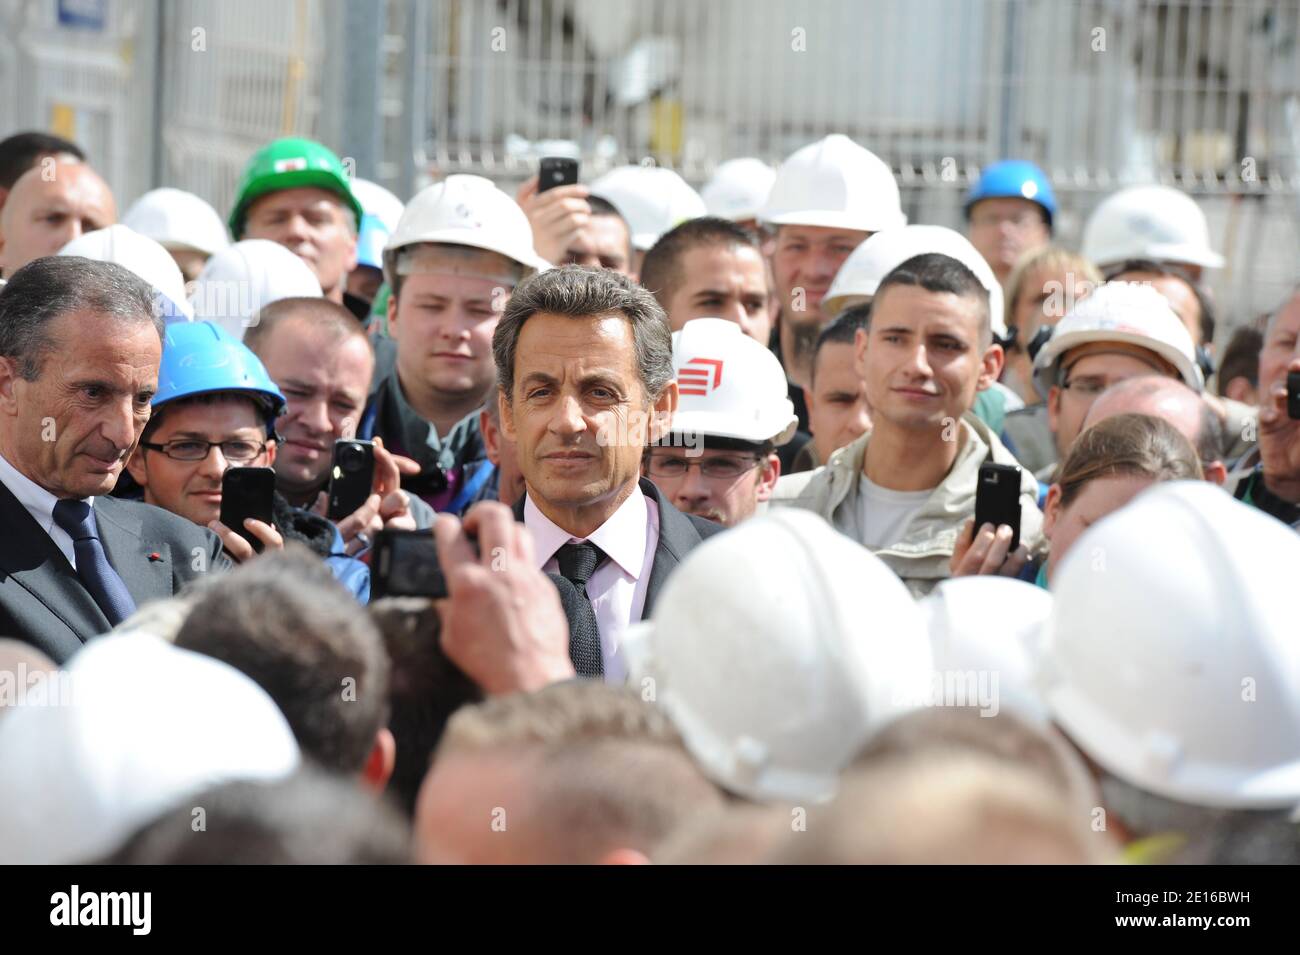 French president Nicolas Sarkozy flanked by CEO of EDF (Electricite de France) French Henri Proglio speaks to employees of the nuclear power station of Gravelines, northern France, on May 3, 2011 during his visit at the site. Photo by Thierry Orban/ABACAPRESS.COM Stock Photo